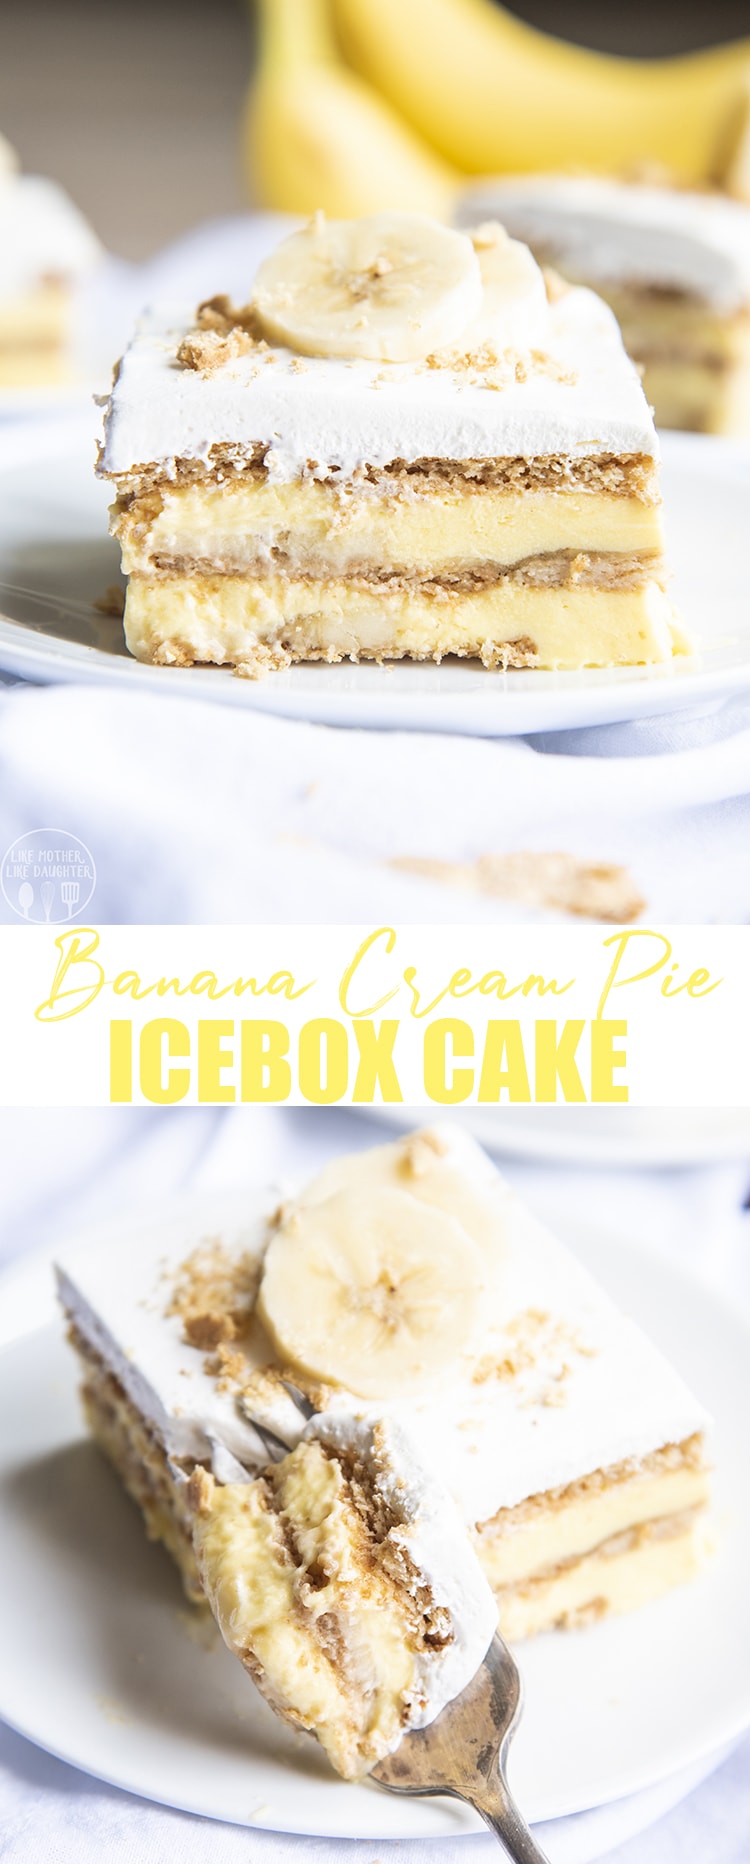 This banana icebox cake is the perfect no bake banana dessert. It's 5 ingredients and so easy to make for a luscious and delicious dessert!